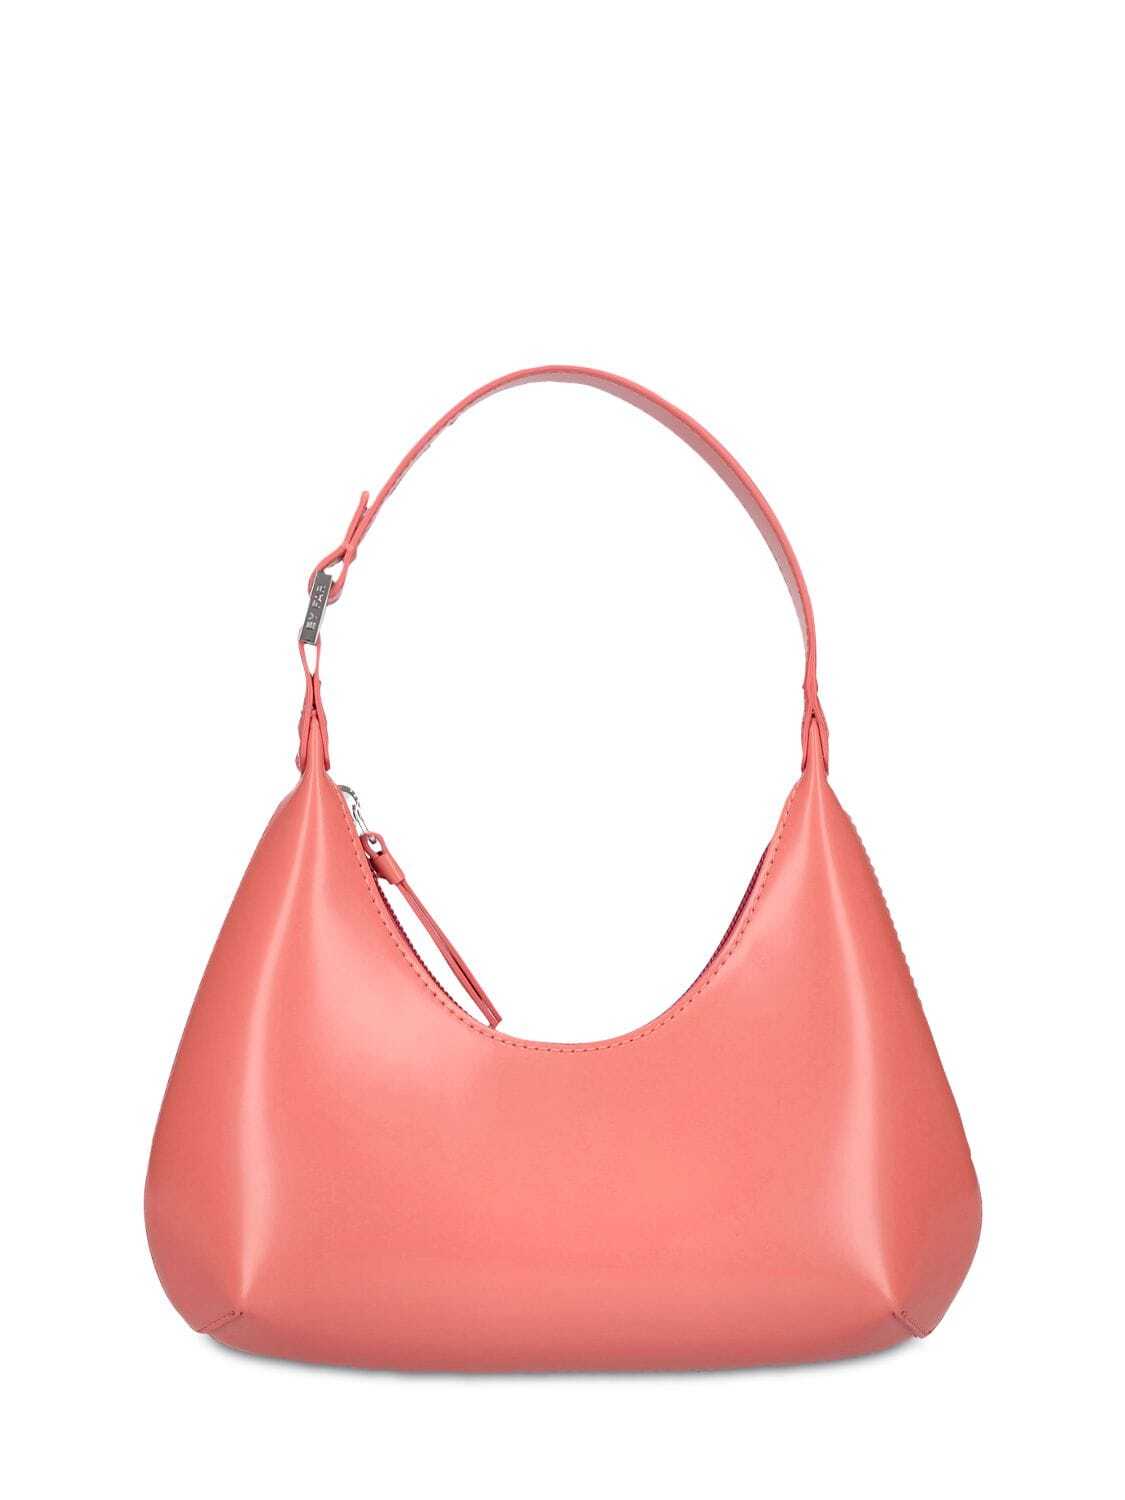 BY FAR Baby Amber Semi Patent Leather Bag in pink